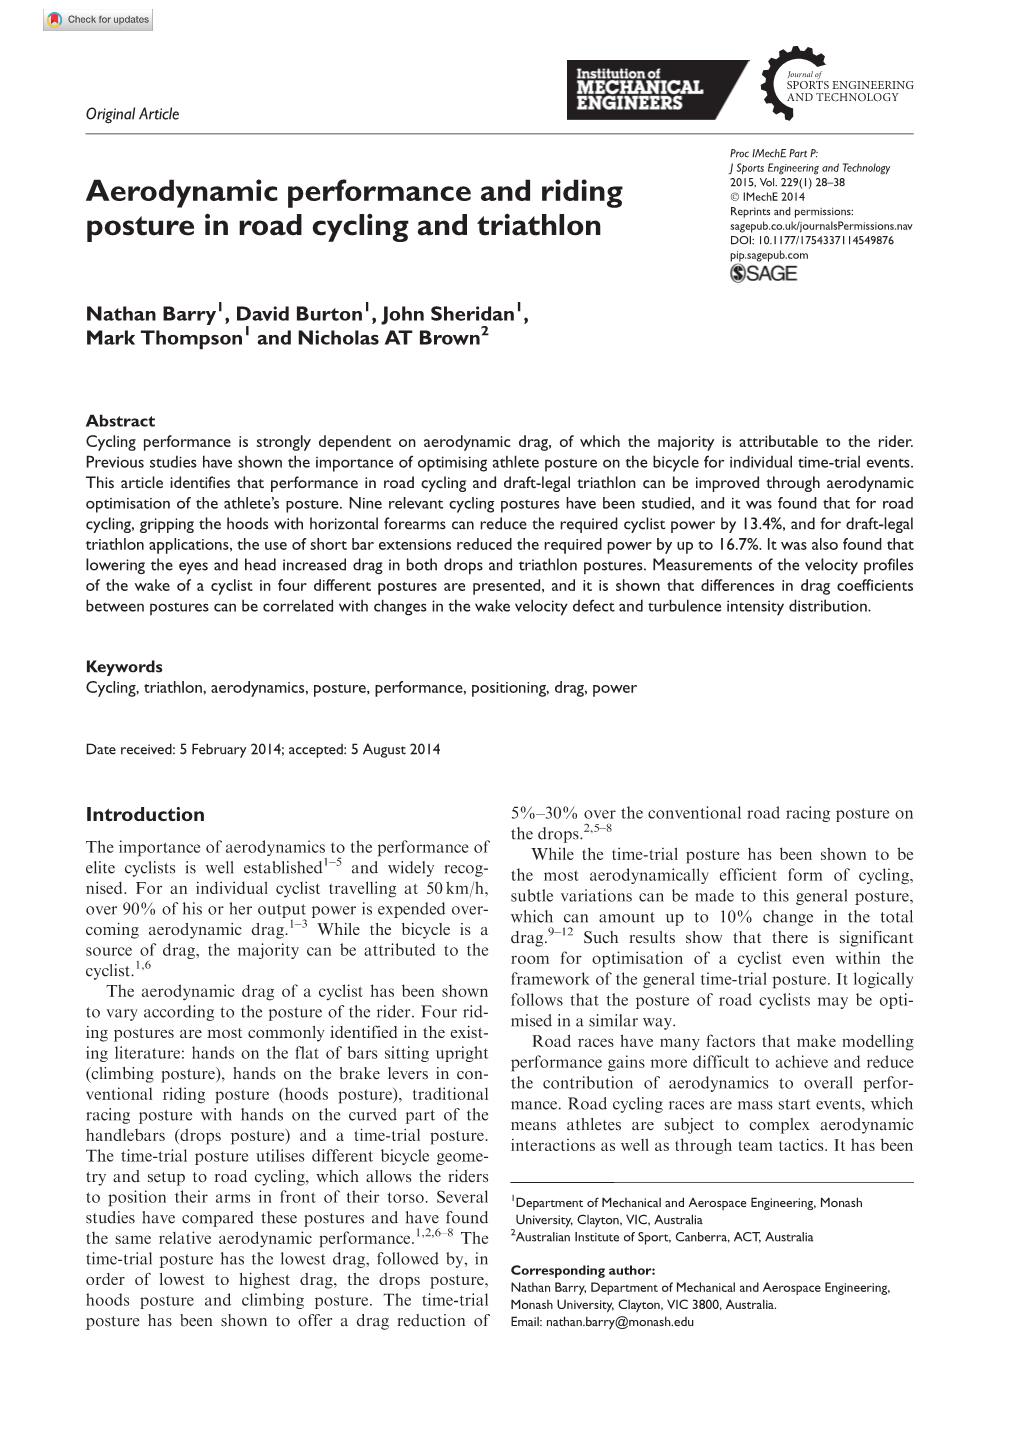 Aerodynamic Performance and Riding Posture in Road Cycling and Triathlon